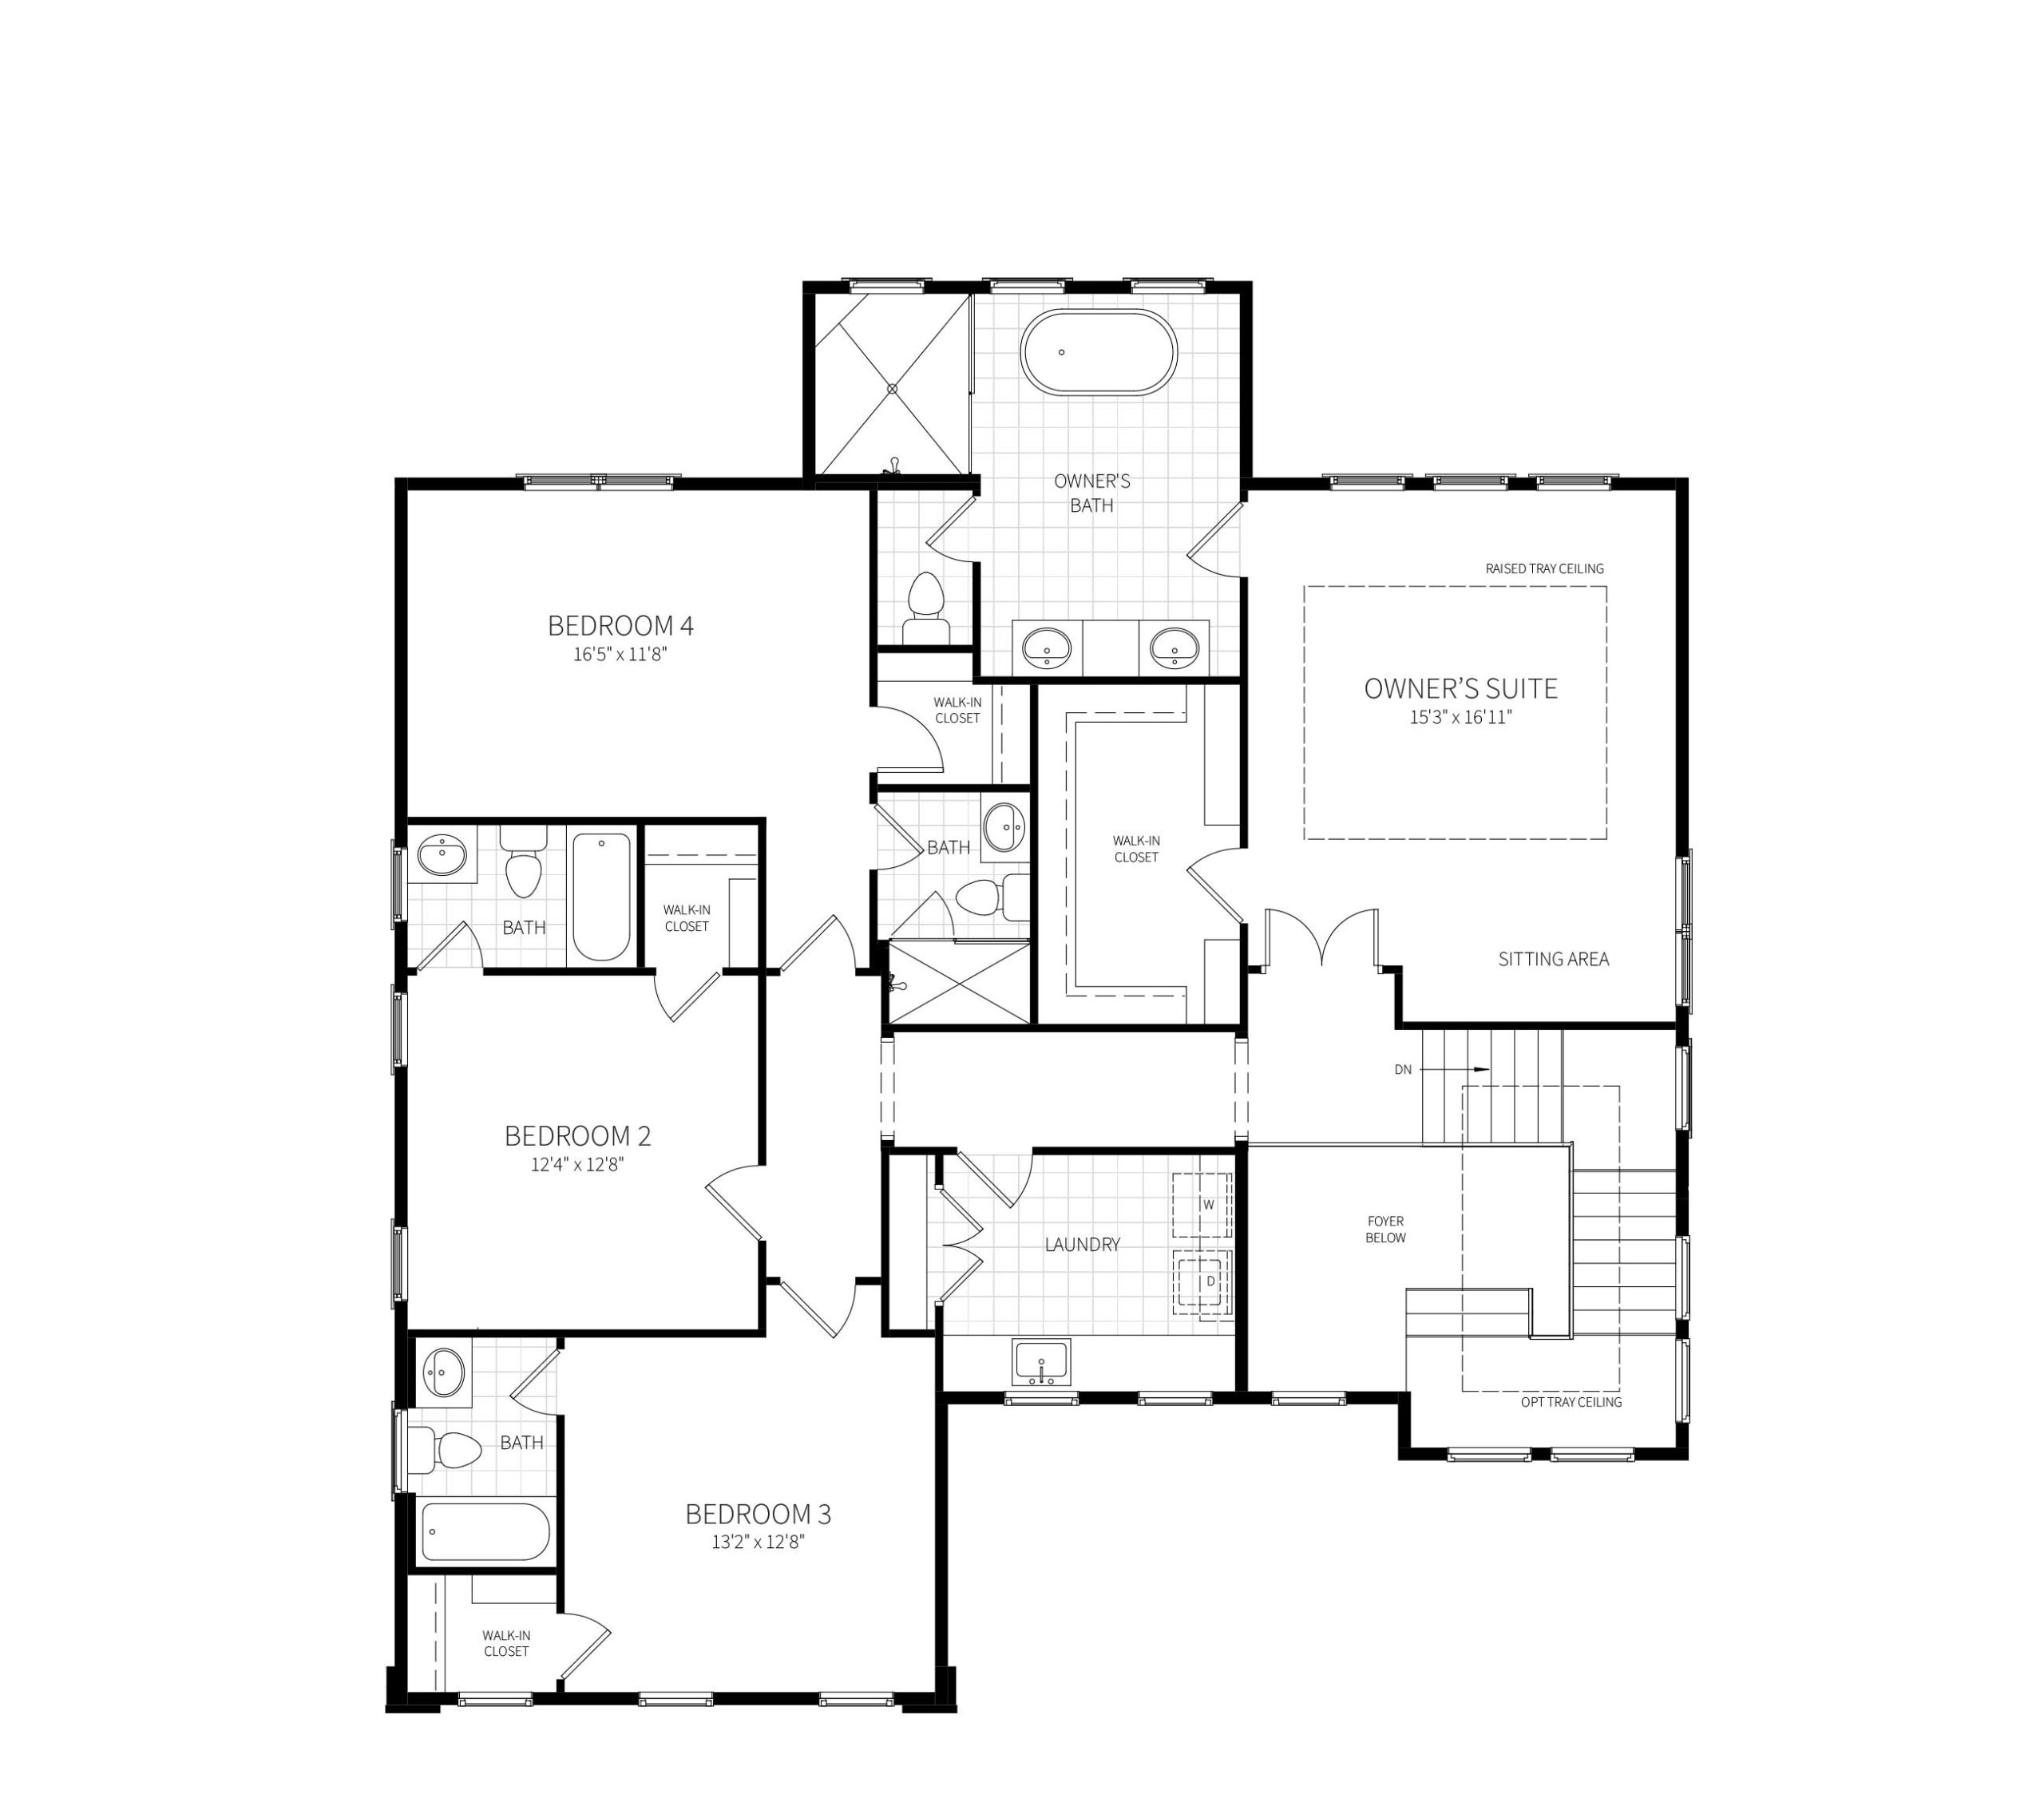 Second floor plan of the Bradley showing generous owner's suite, and three additional bedrooms and upstairs laundry room.